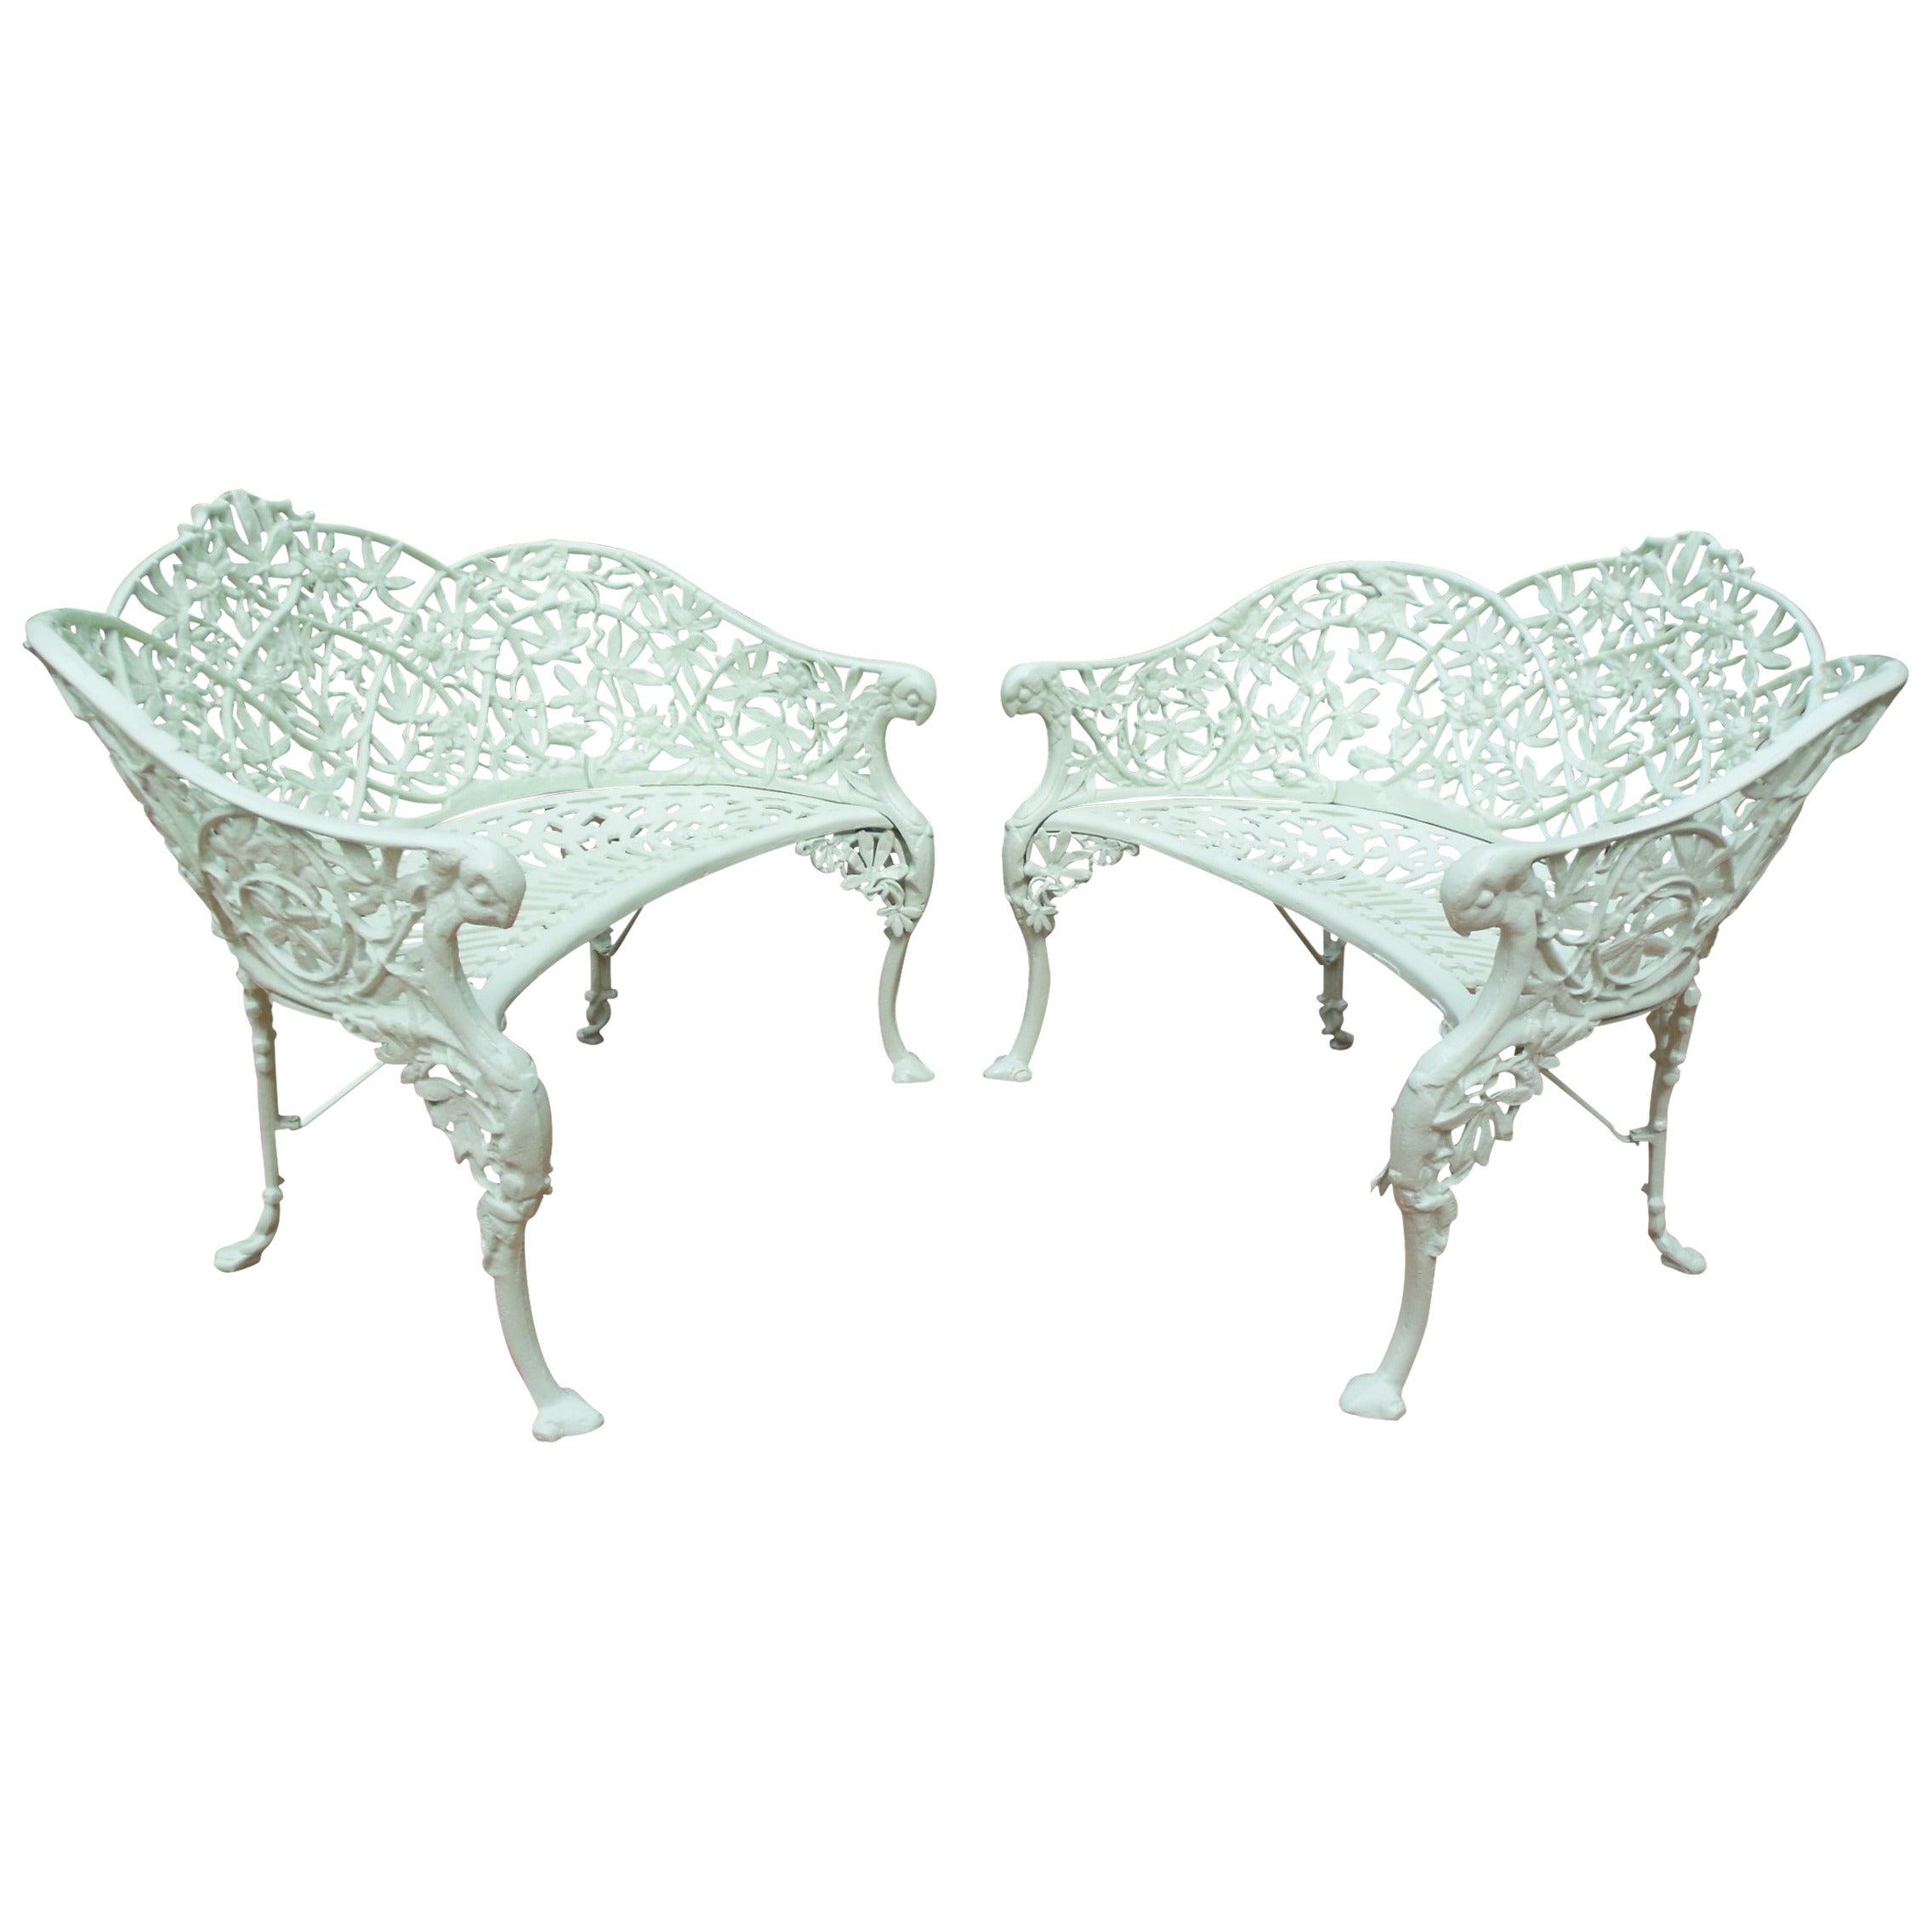 Pr Cast Iron Benches in Passion Flower pattern For Sale